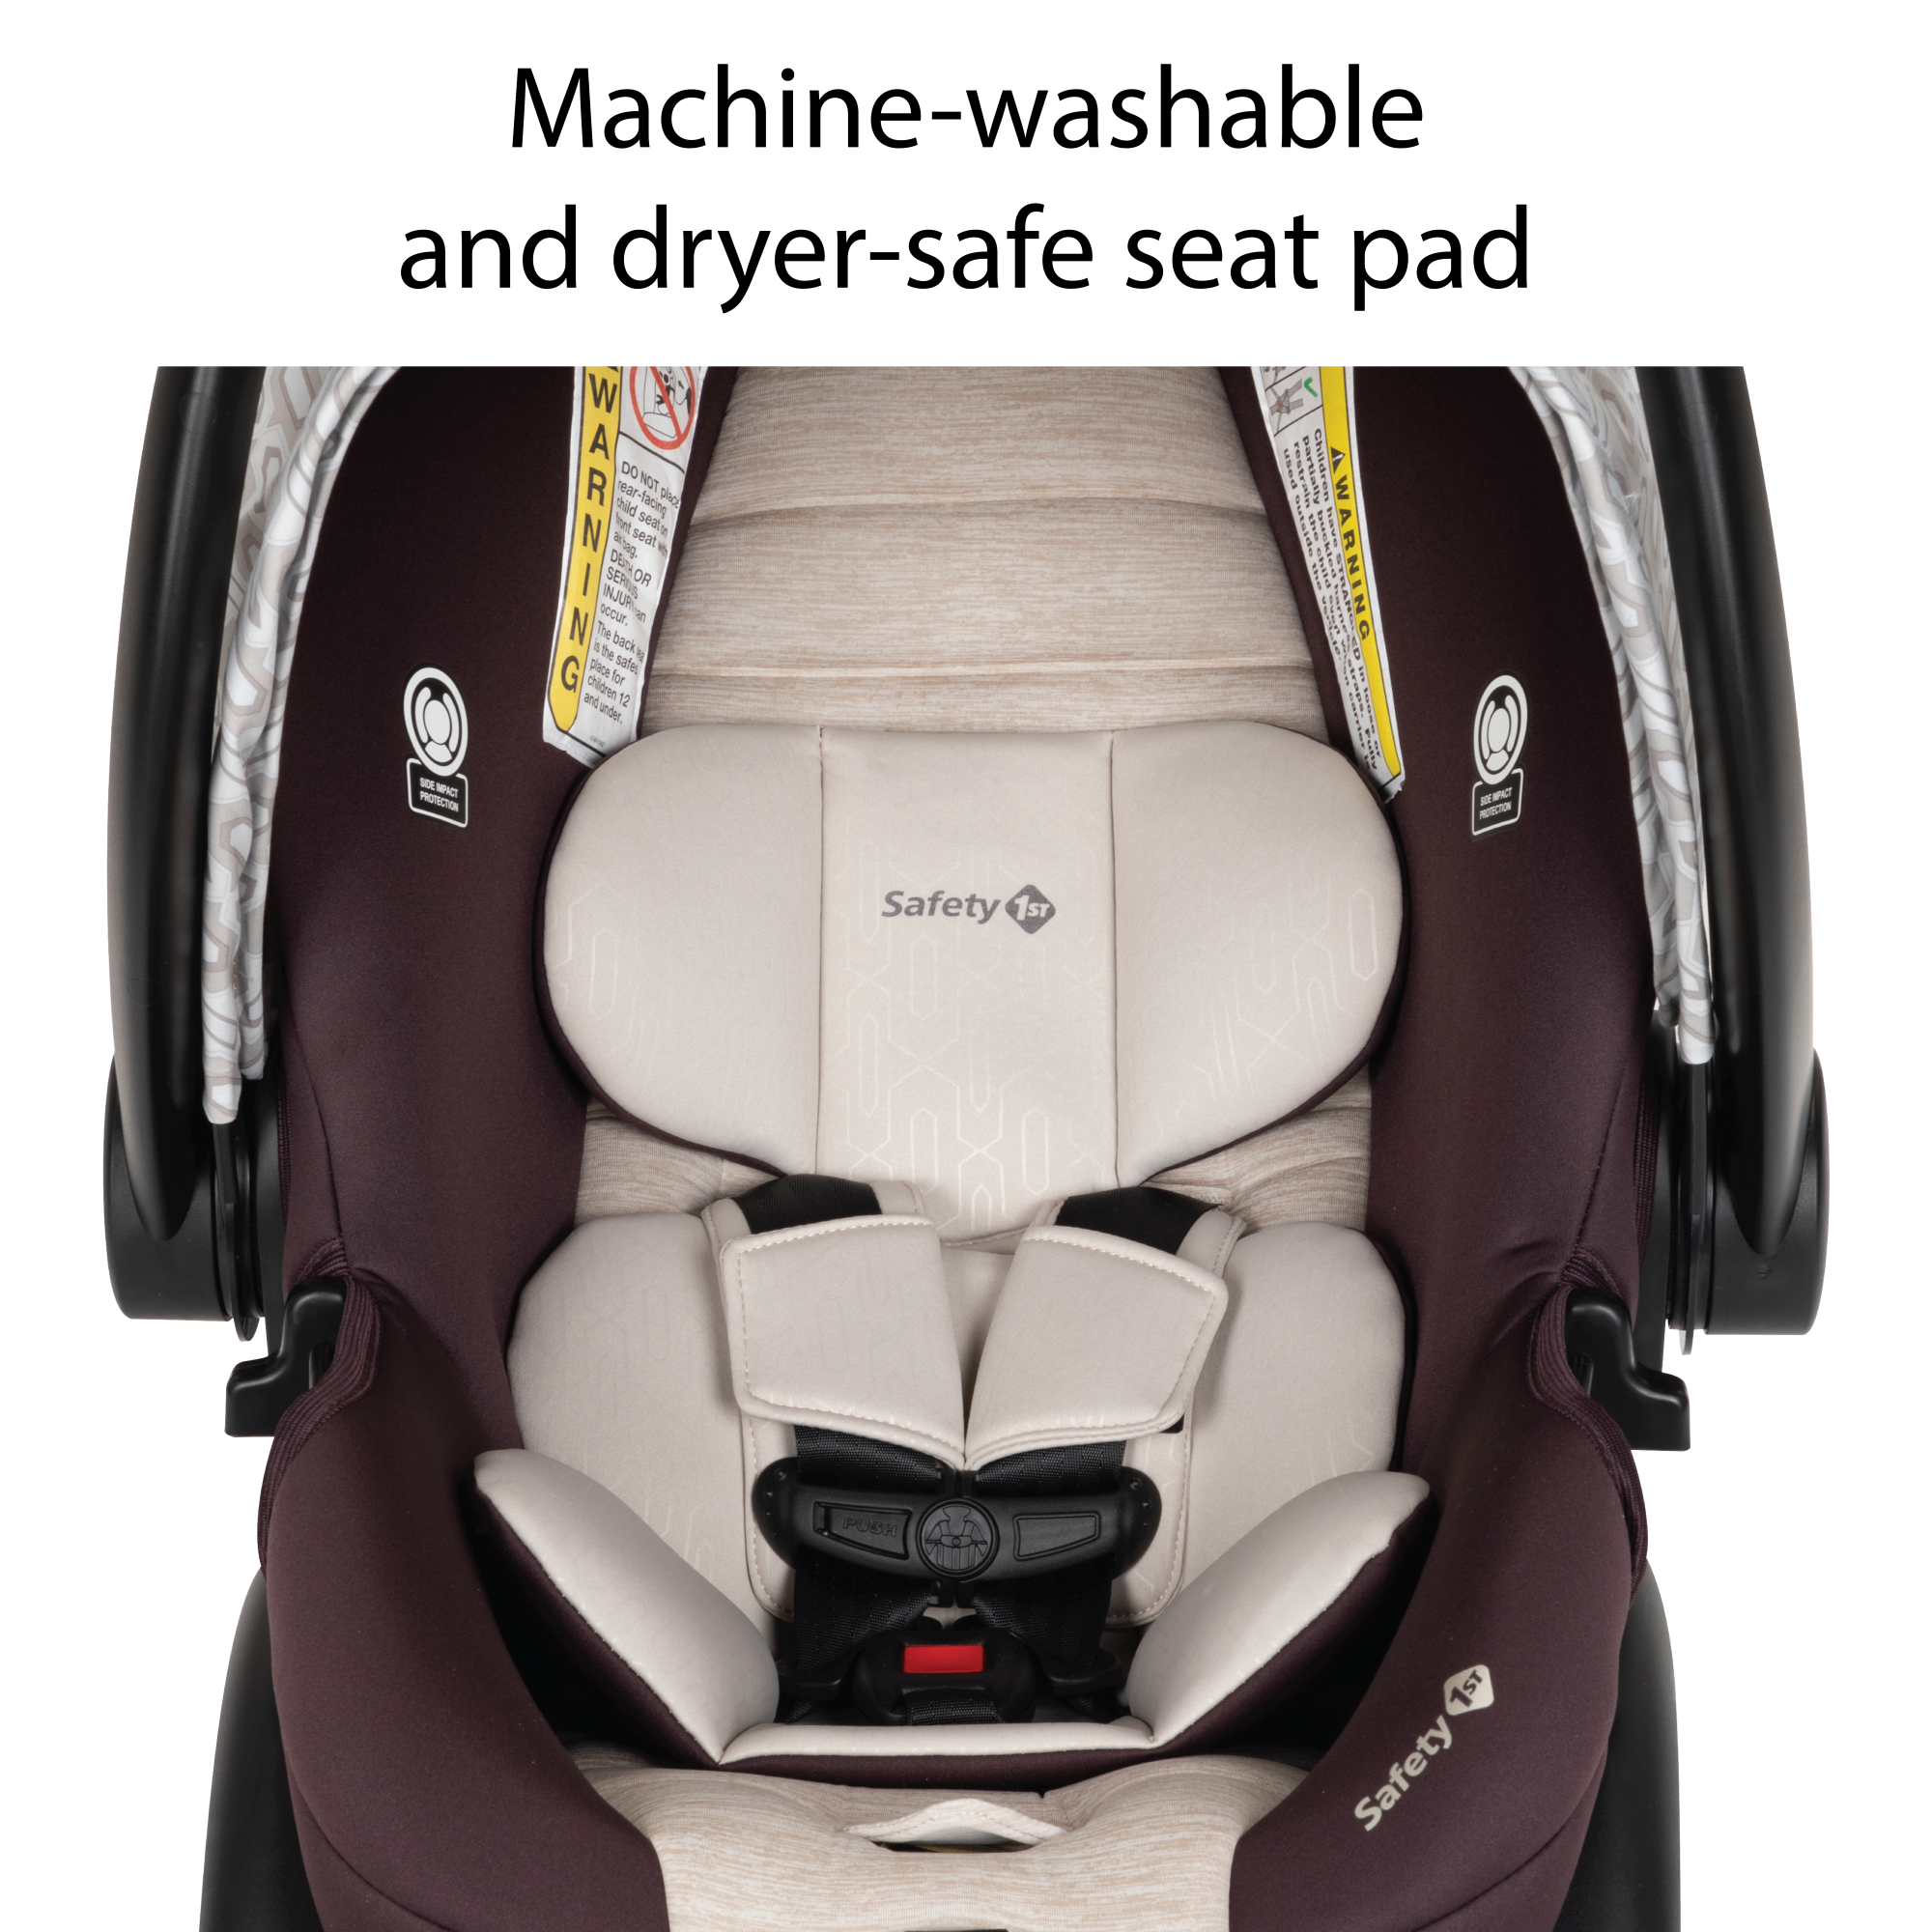 Deluxe Grow and Go™ Flex 8-in-1 Travel System - machine-washable and dryer-safe seat pad